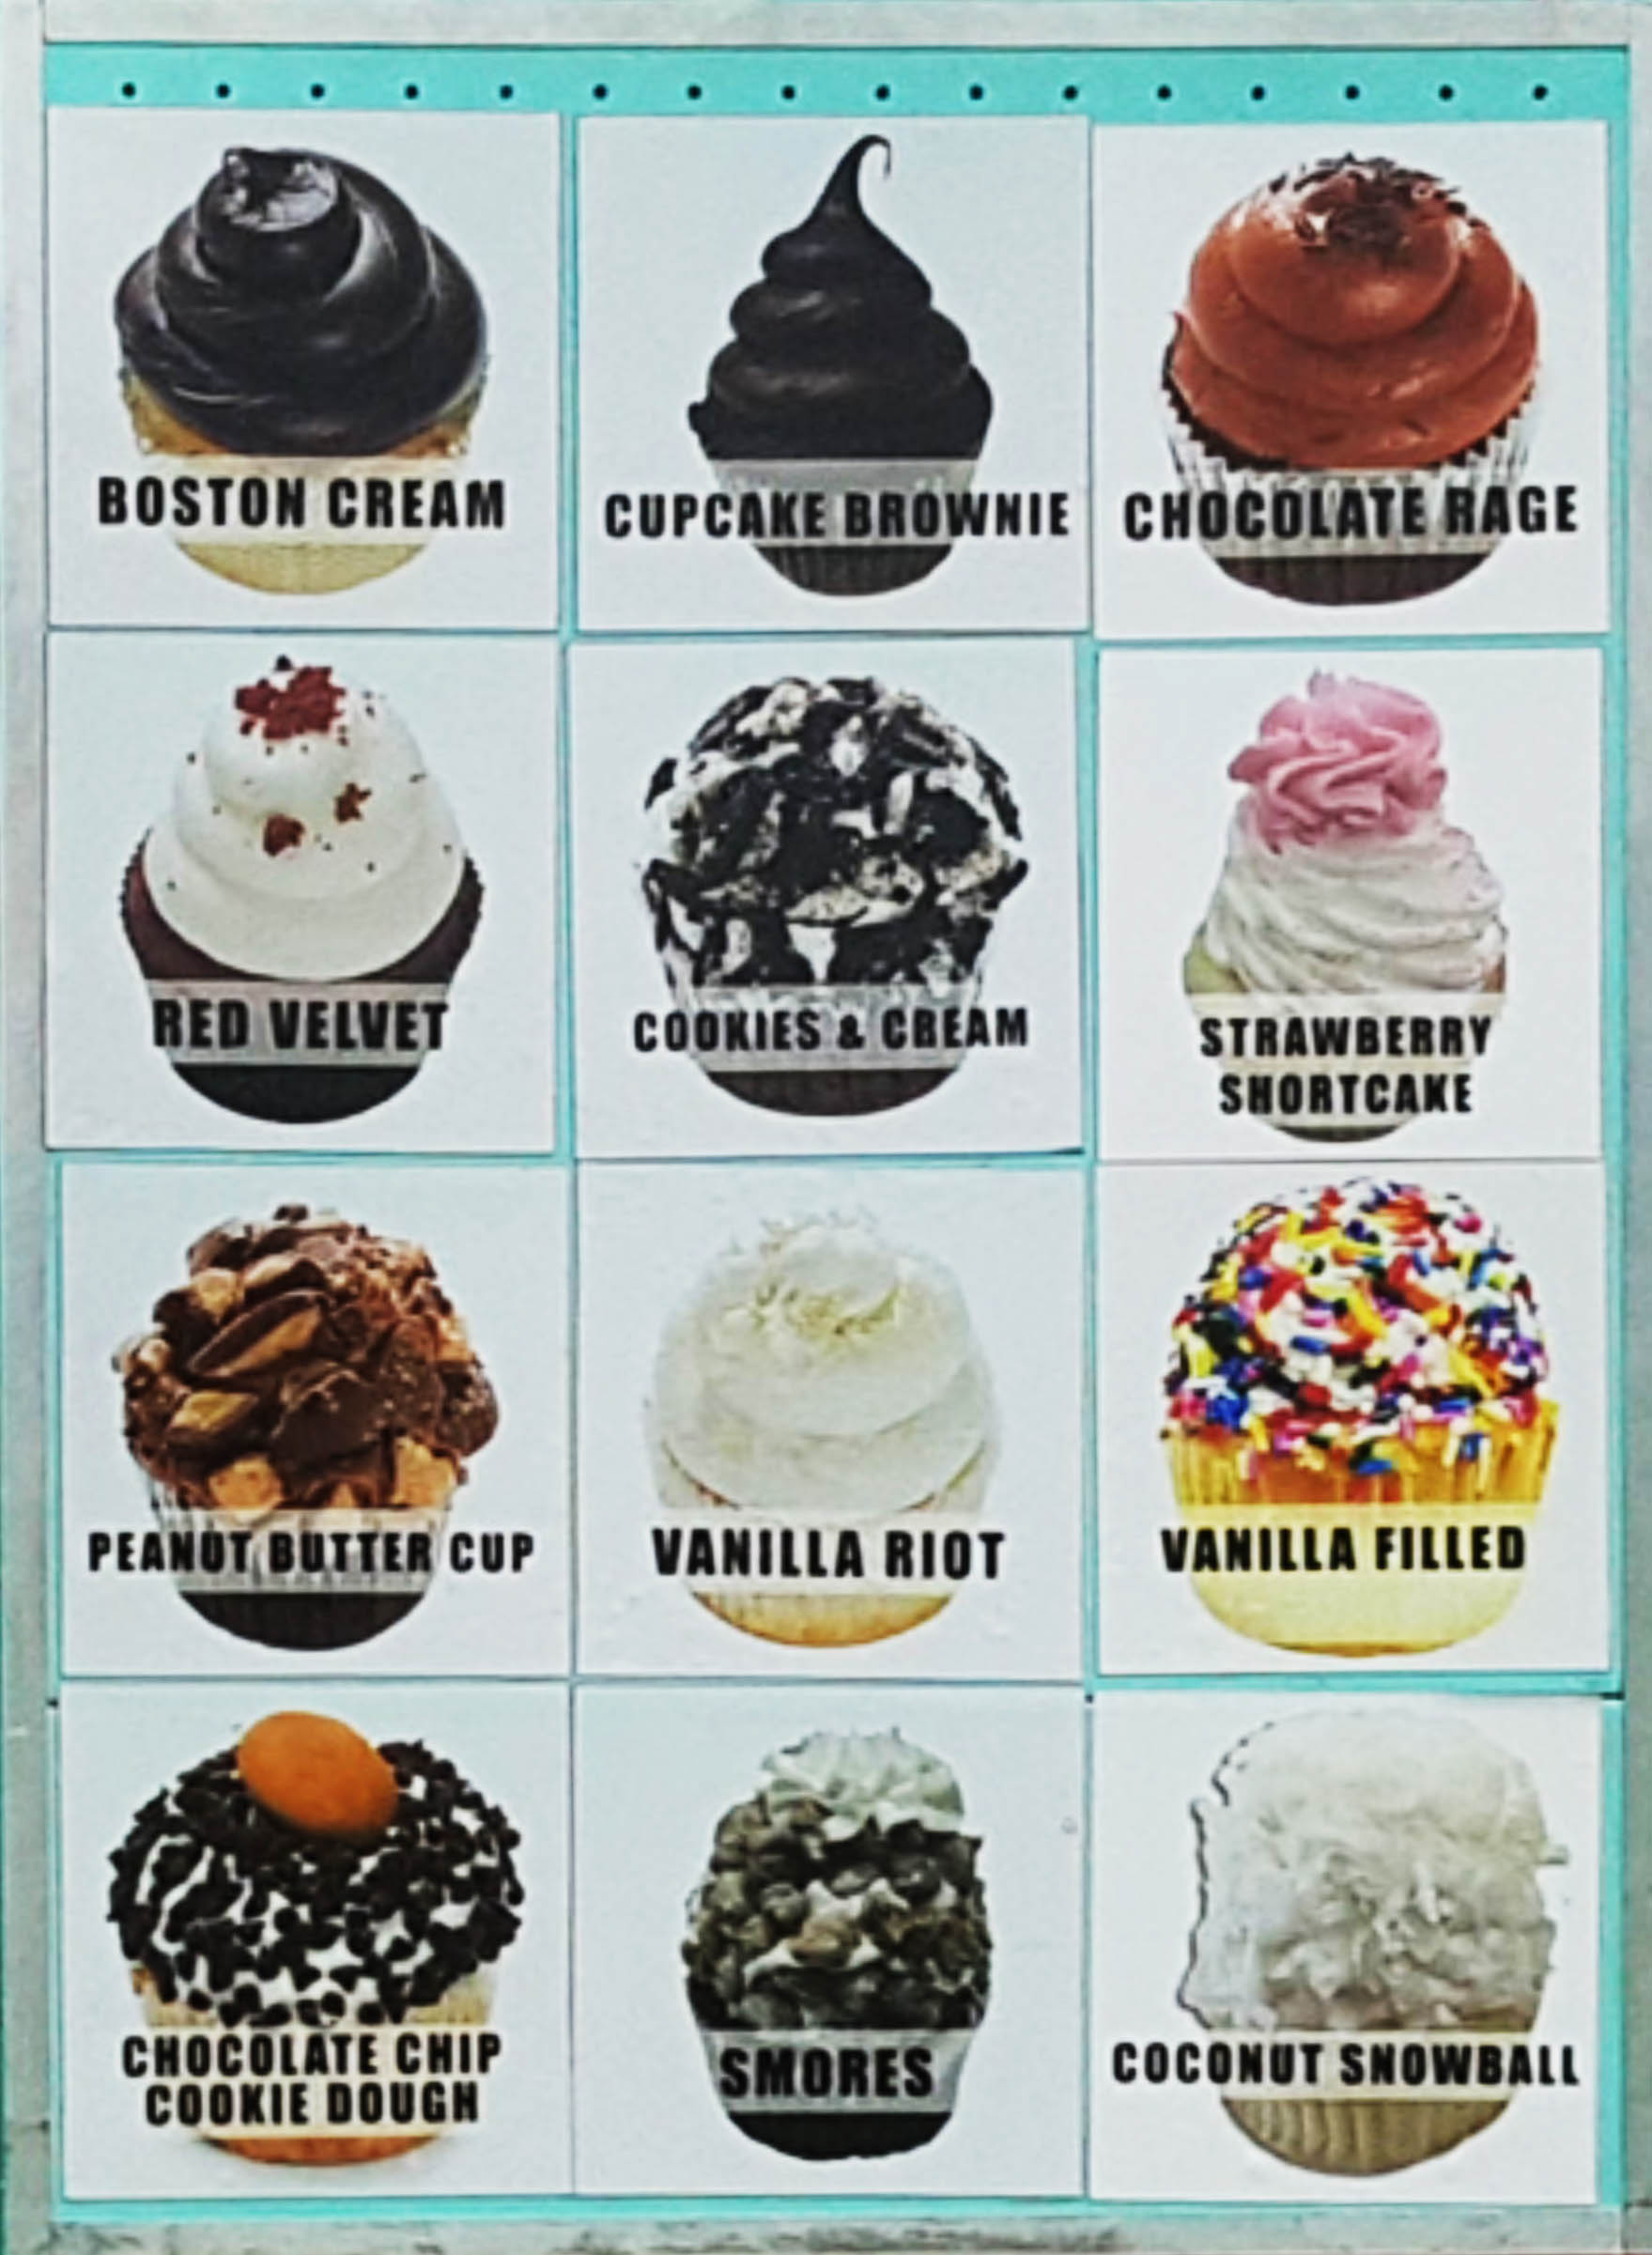 House of Cupcakes Menu | Food Trucks On The Move